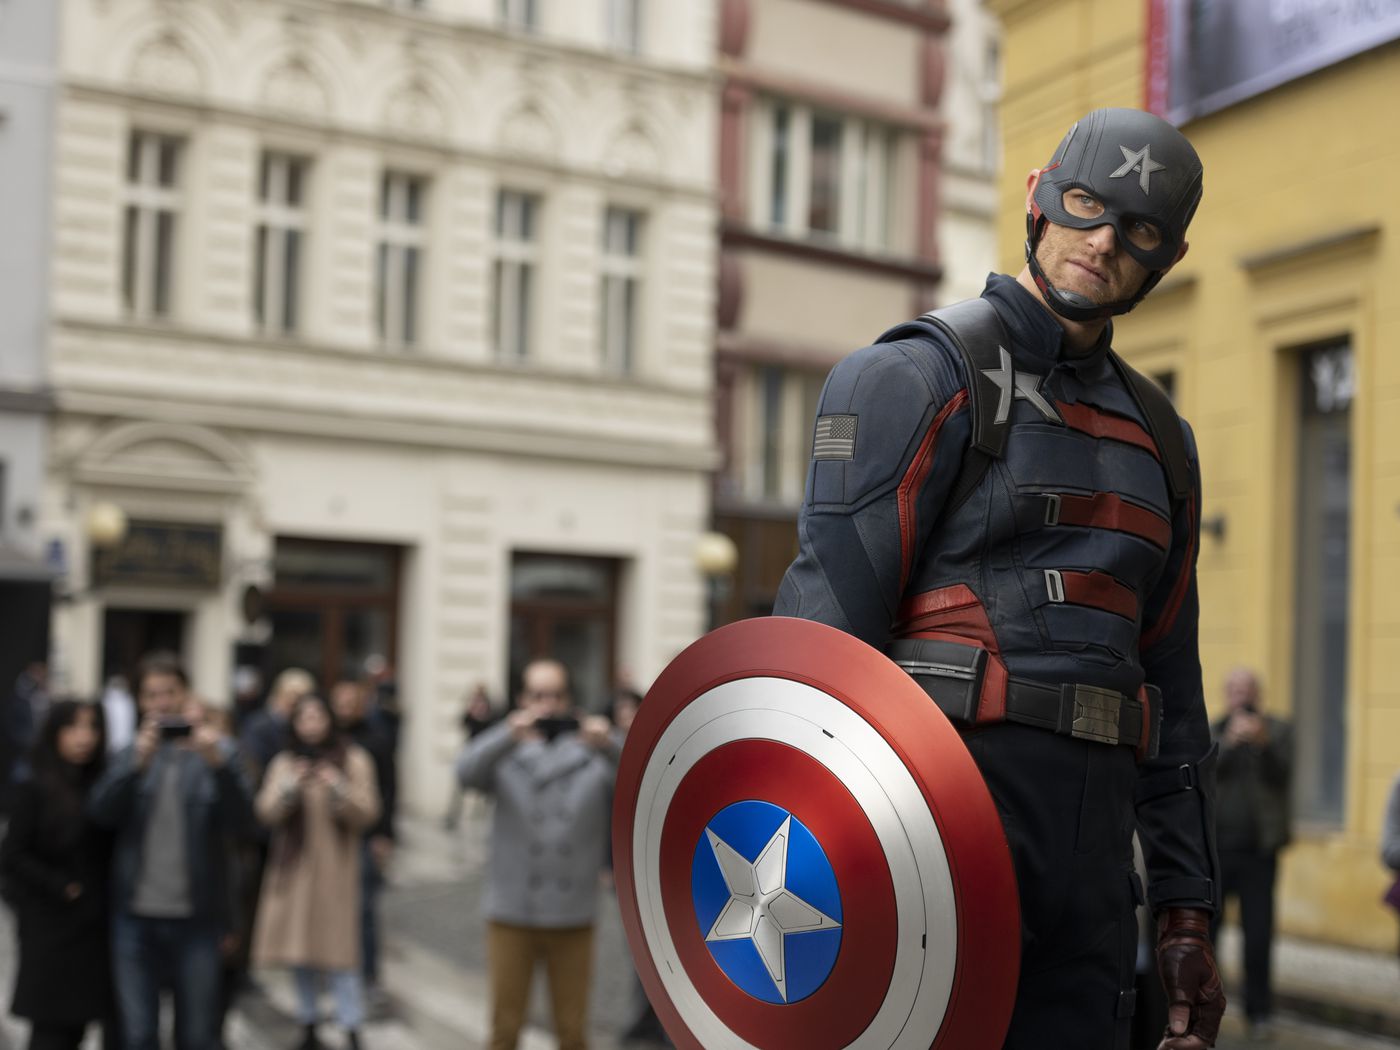 In the Marvel Cinematic Universe, there is no heroic way to seek power